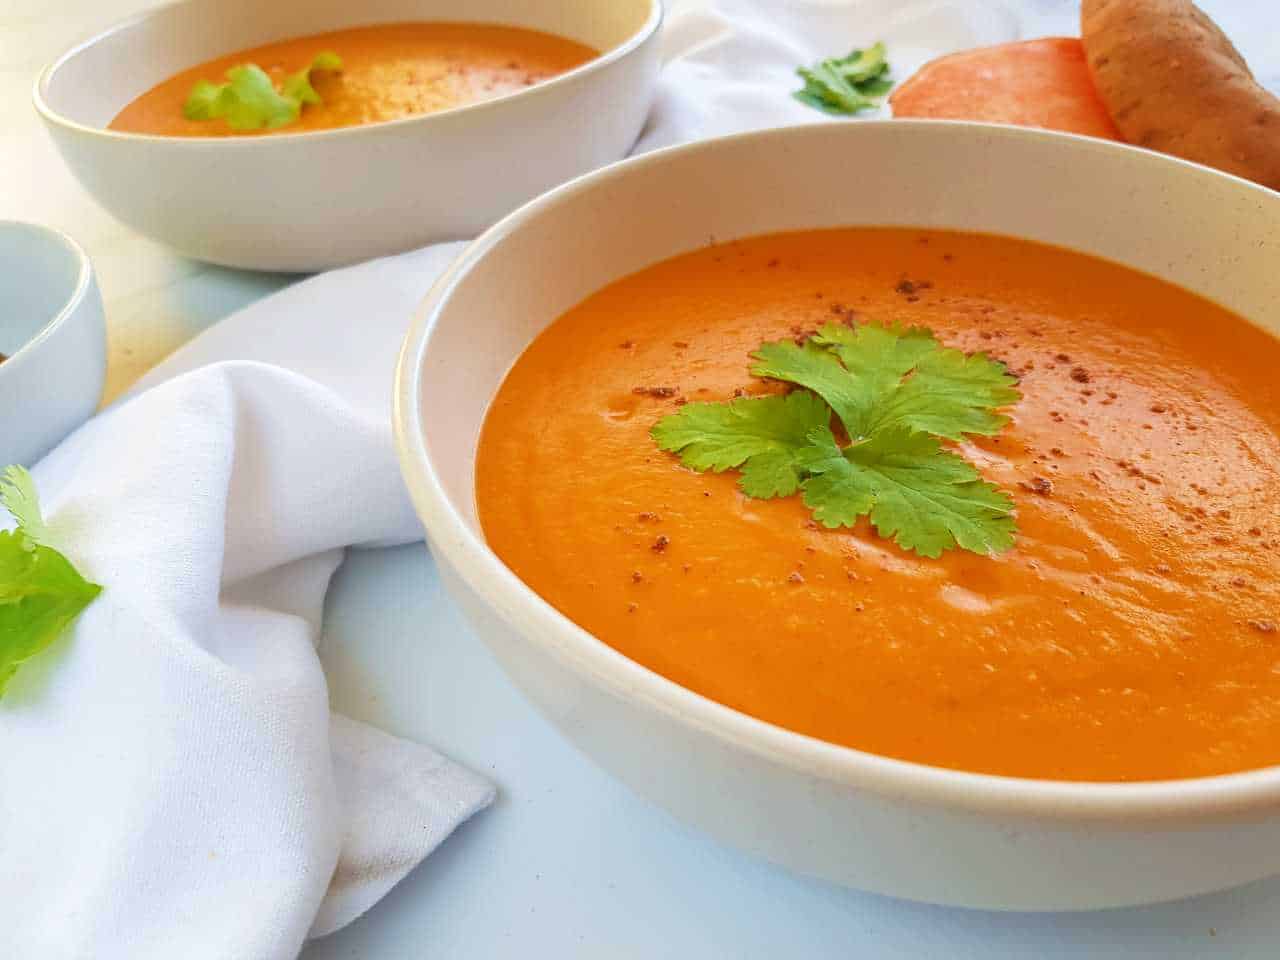 Roasted red pepper and sweet potato soup in white bowls with a white napkin and a sweet potato in the background.